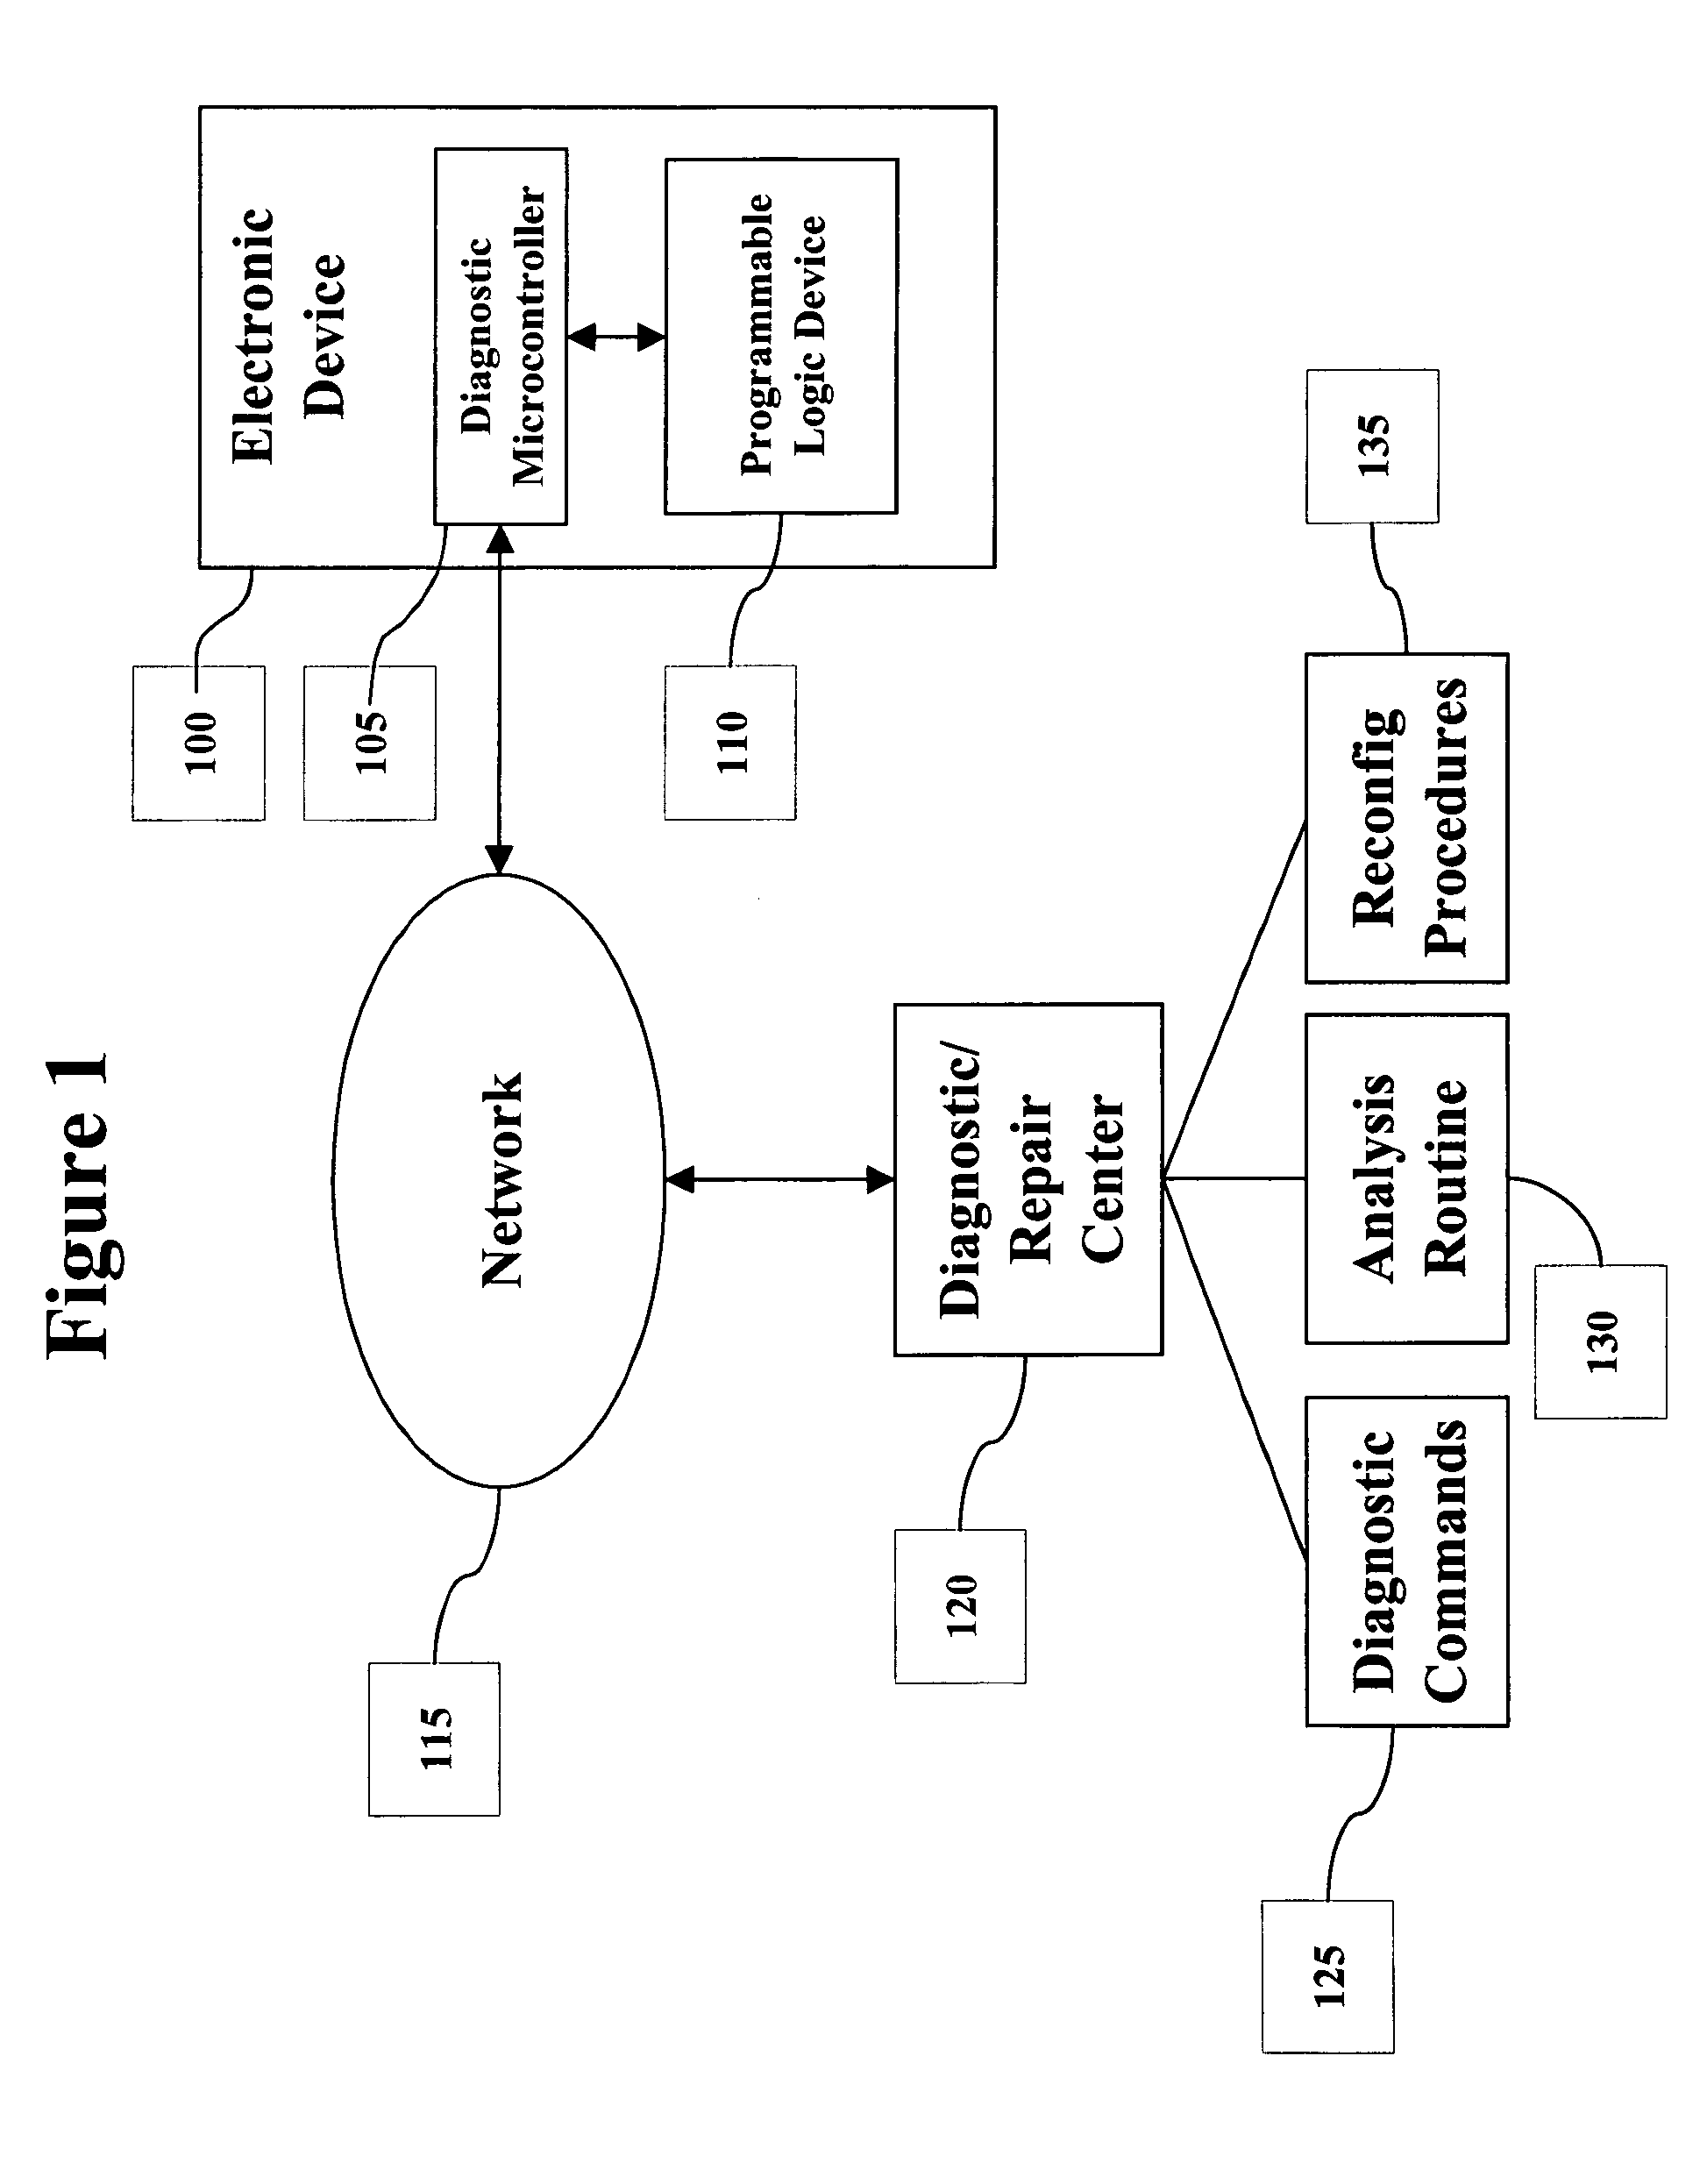 Network based diagnostic system and method for programmable hardware